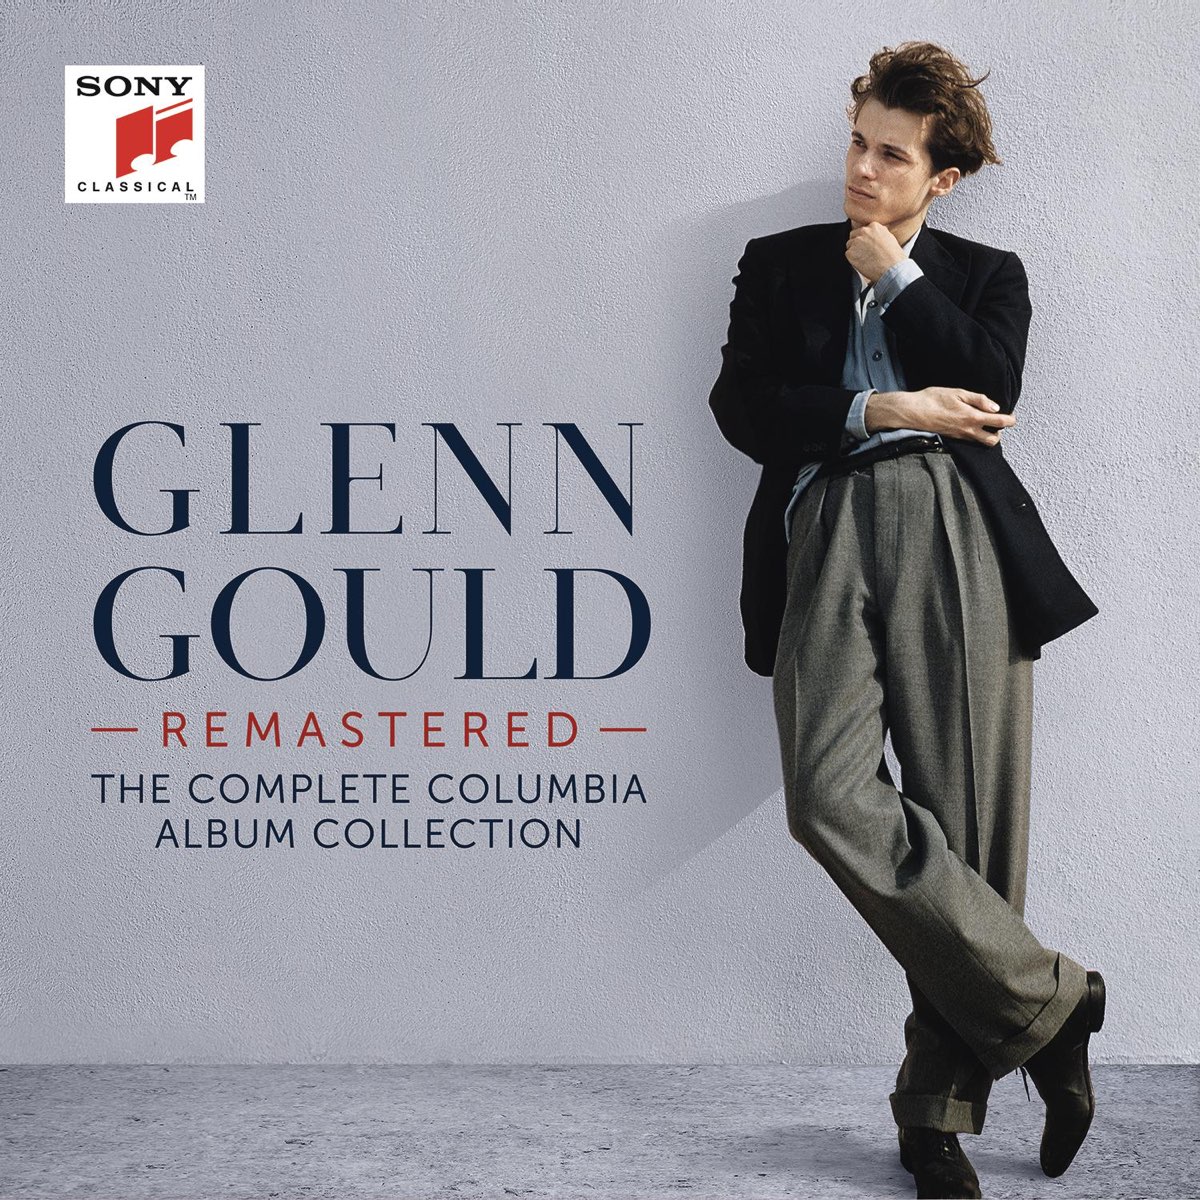 Glenn Gould Remastered - The Complete Columbia Album Collection